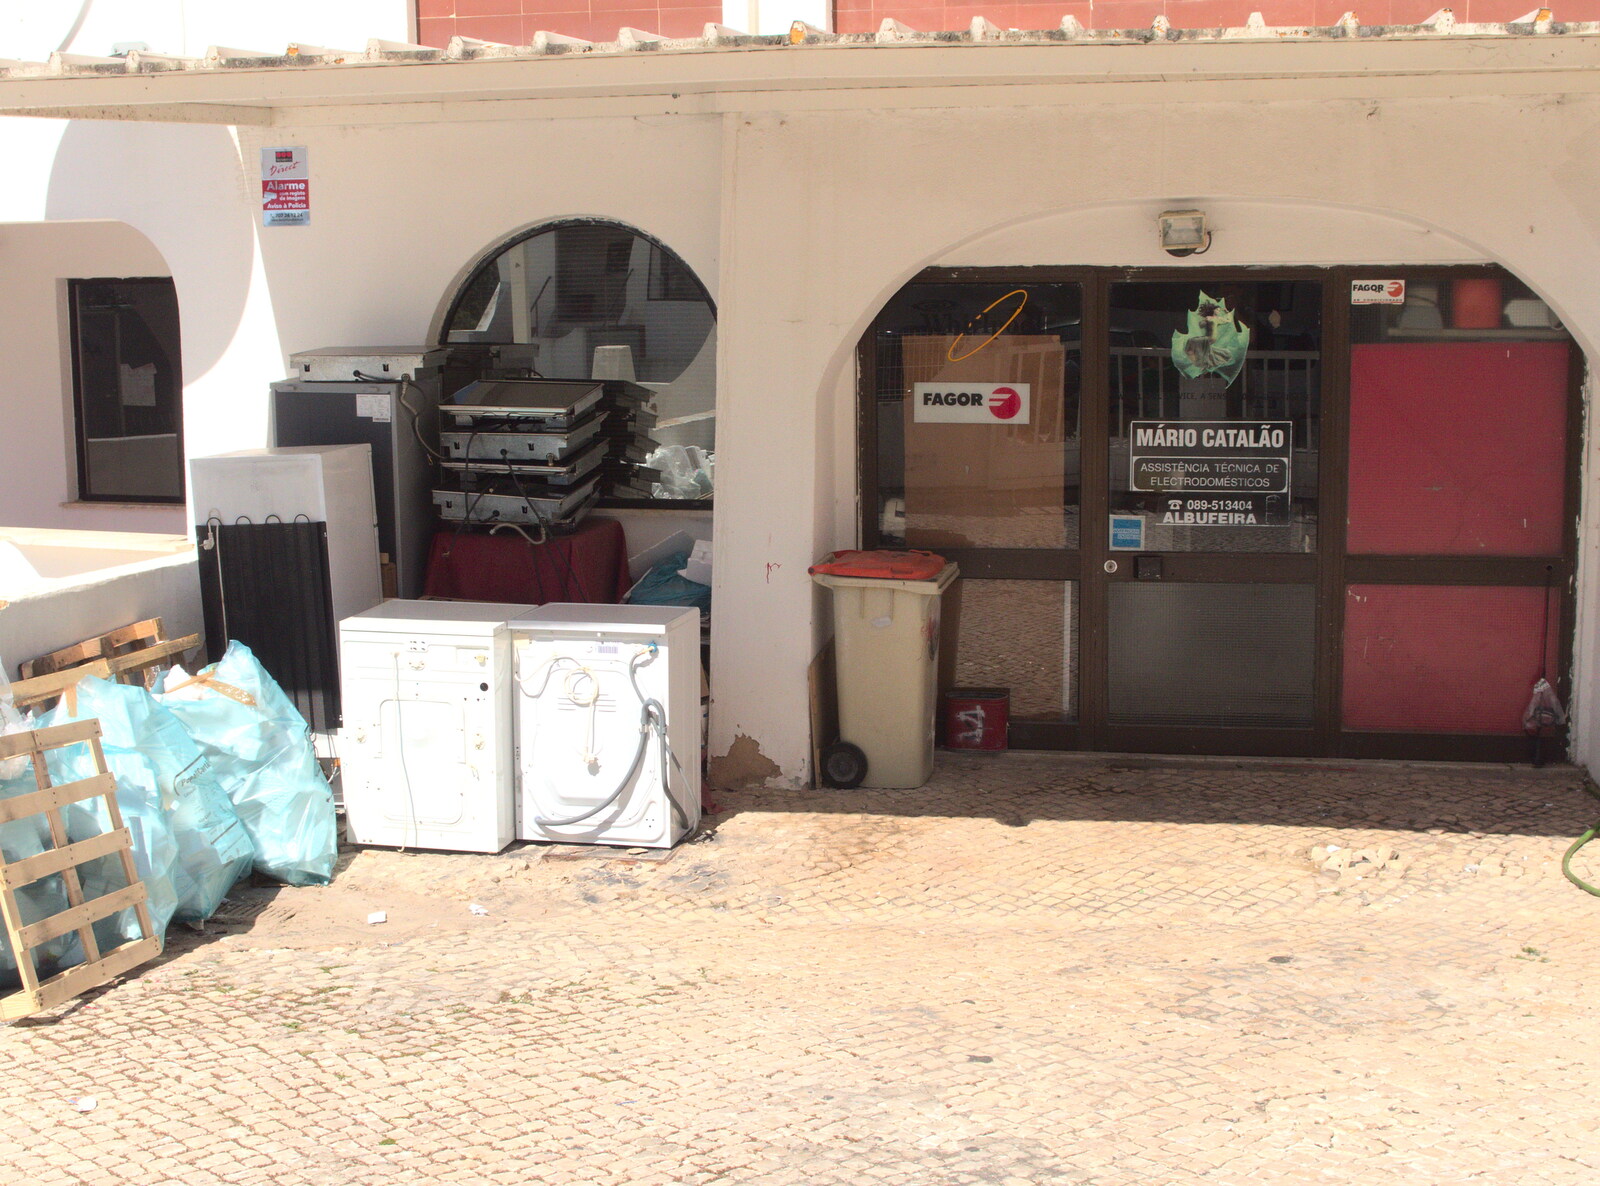 Discarded white goods outside a café from Last Days and the Journey Home, Albufeira, Portugal - 9th April 2016